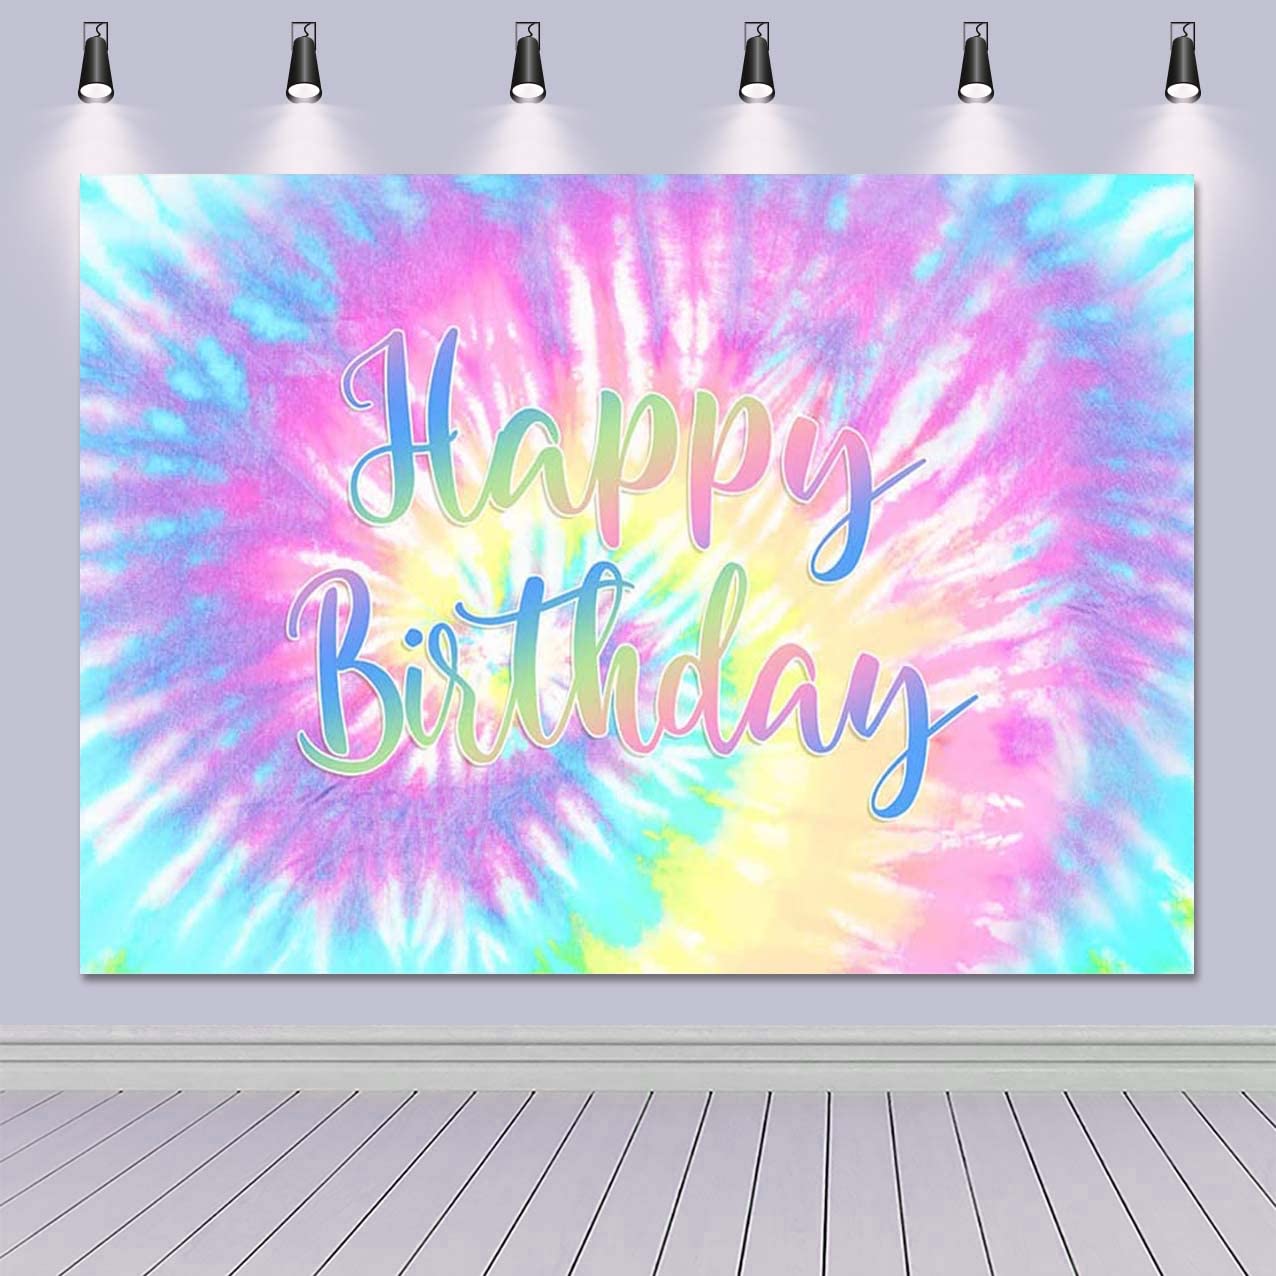 Rainbow Backdrop for Happy Birthday 7X5FT Macaron Pastel Colorful Birthday Photography Background Tie Dye Theme Party Supplies Children Women Girls Sweet 16th Birthday Cake Table Decoration Banner